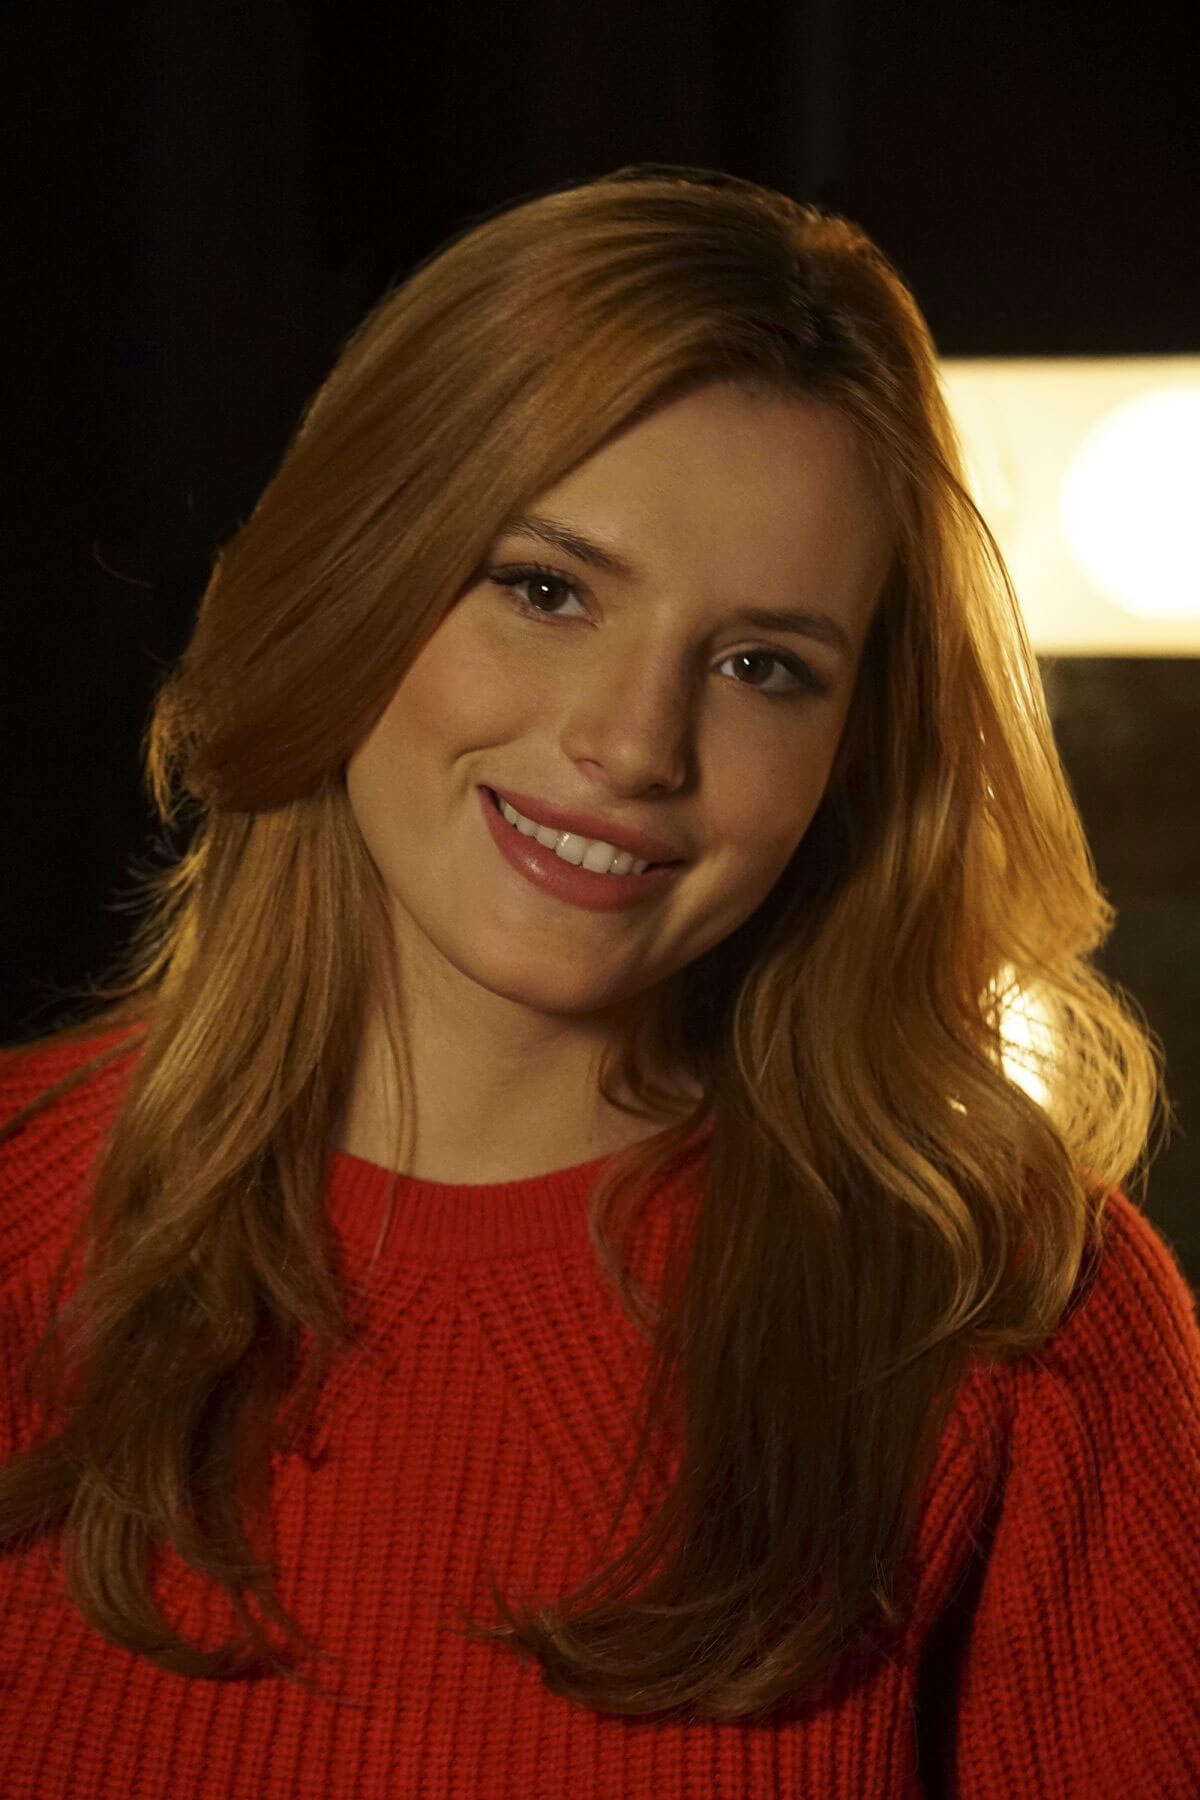 Bella Thorne at Famous in Love, Season 1 Episode 03, Promos